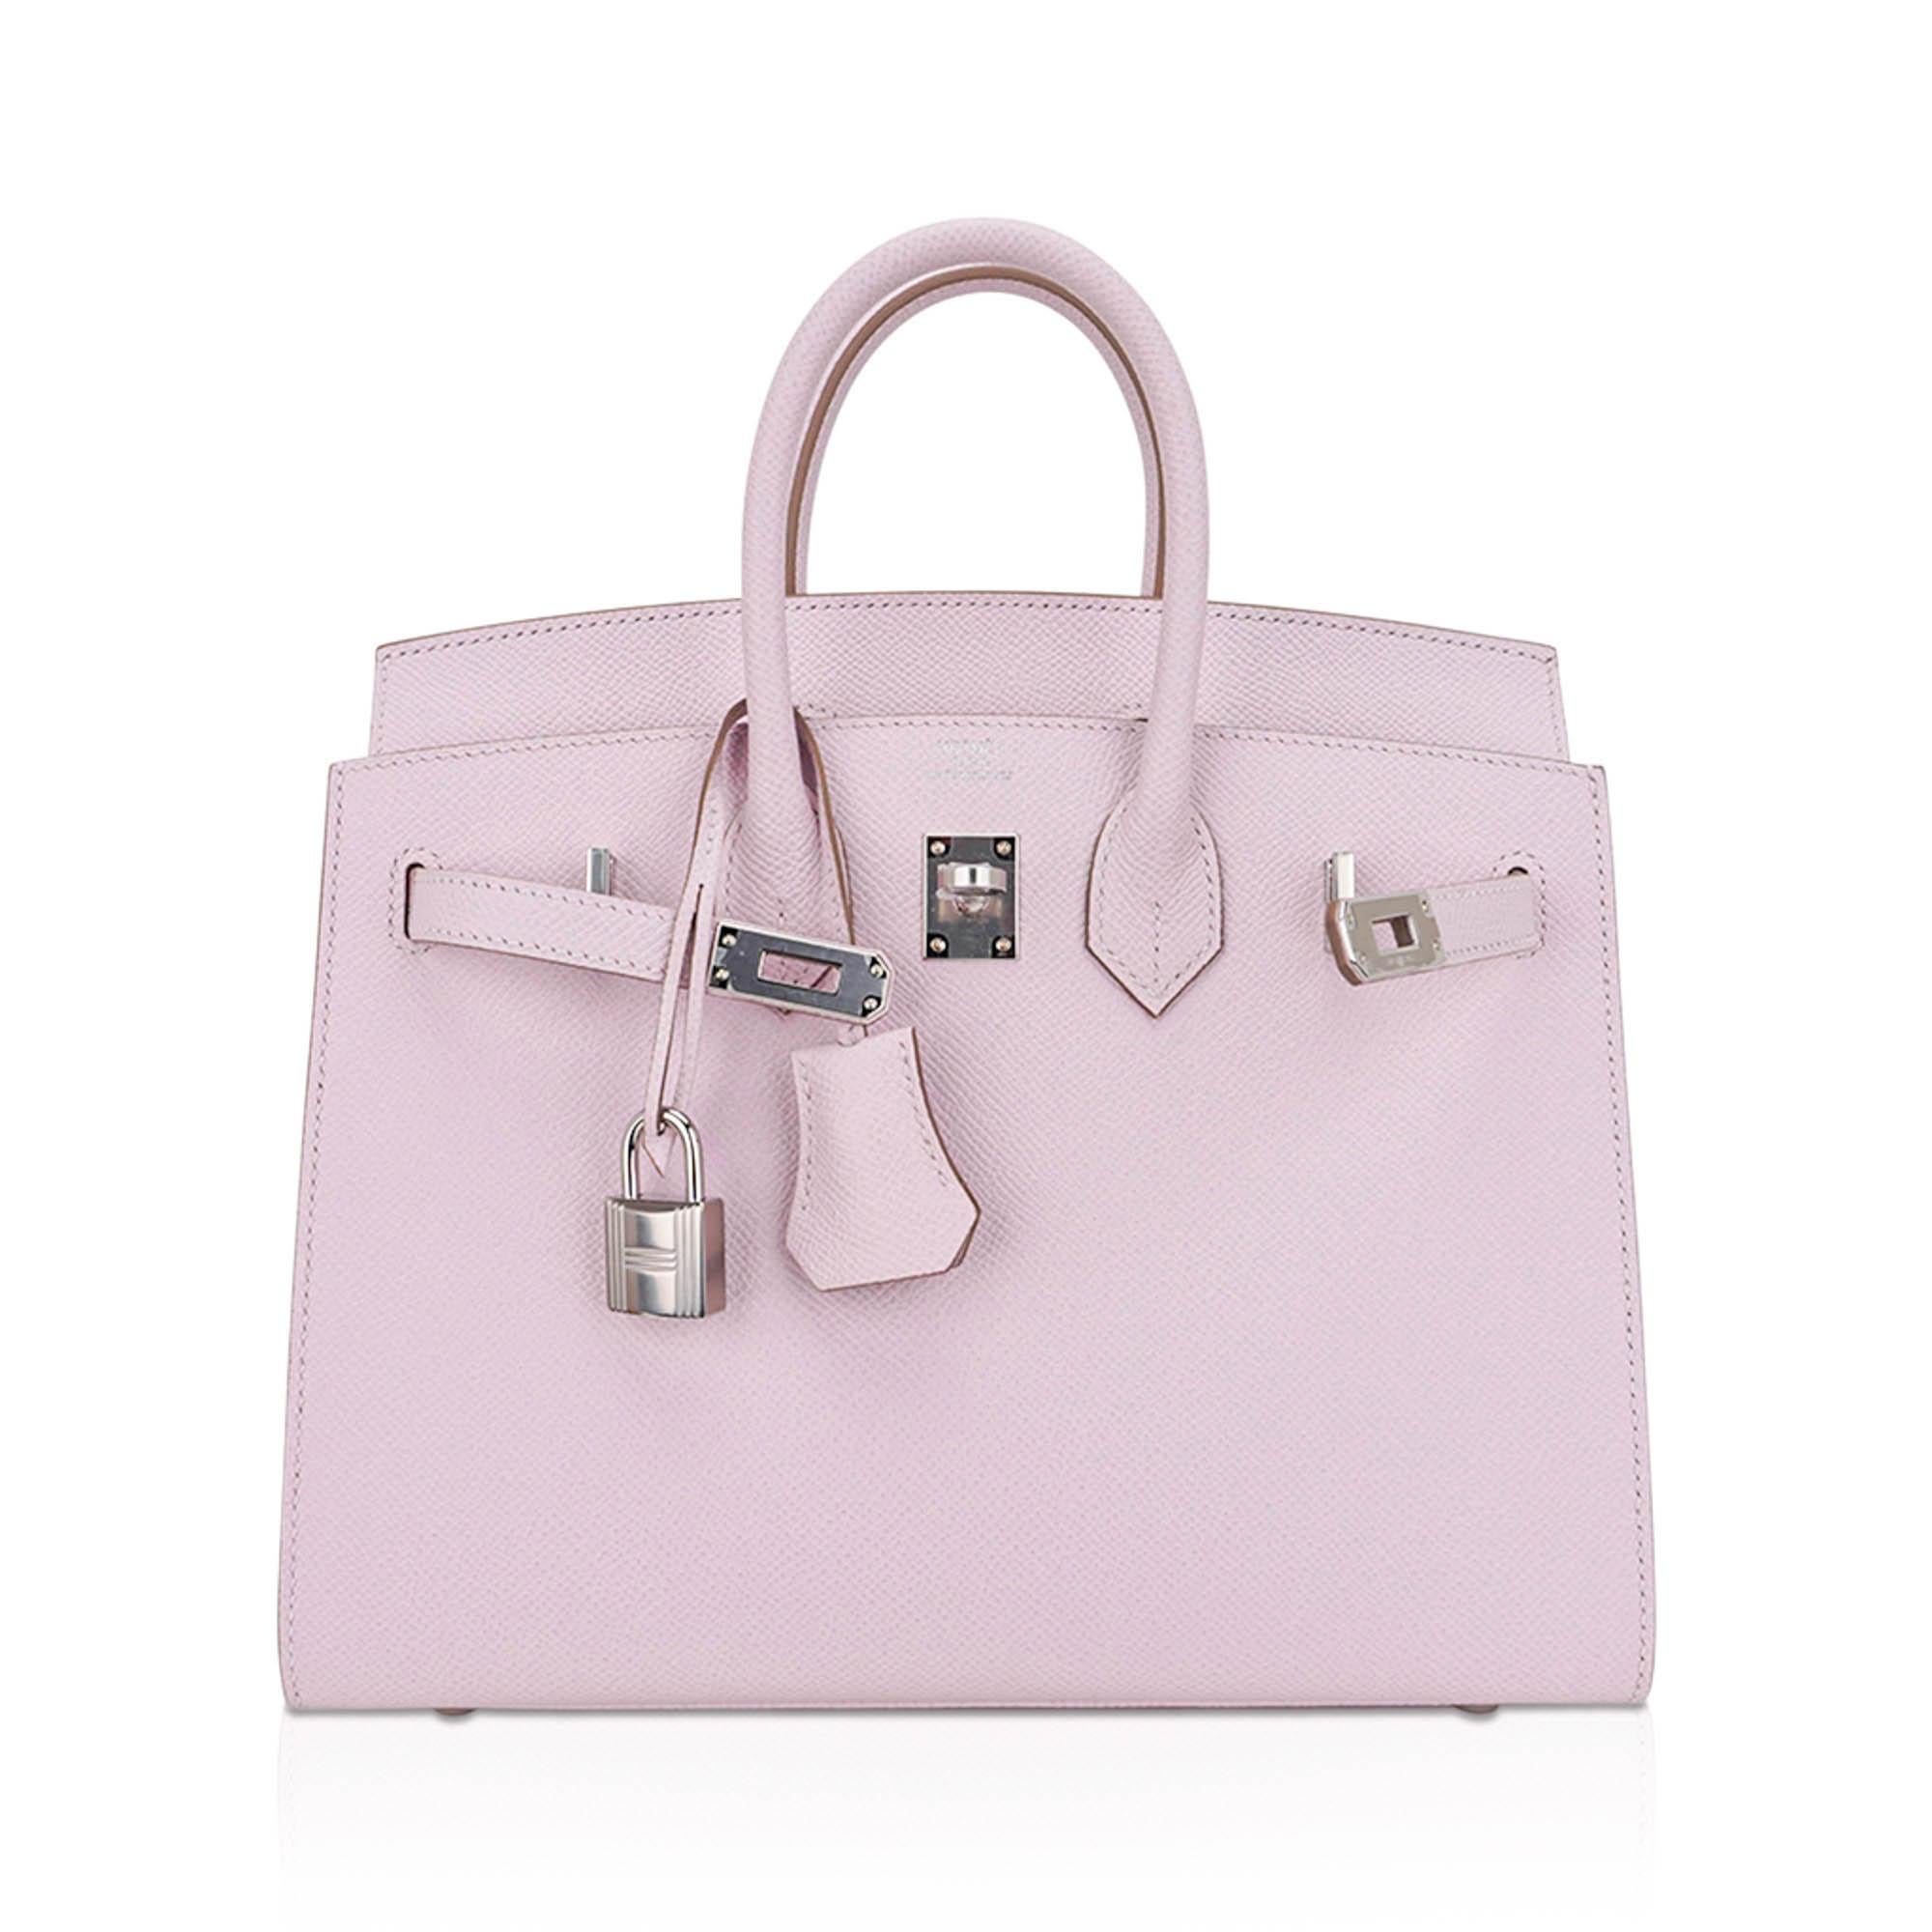 Hermes Birkin 25 Bag Sellier Mauve Pale Epsom Leather with Palladium Hardware In New Condition For Sale In Miami, FL